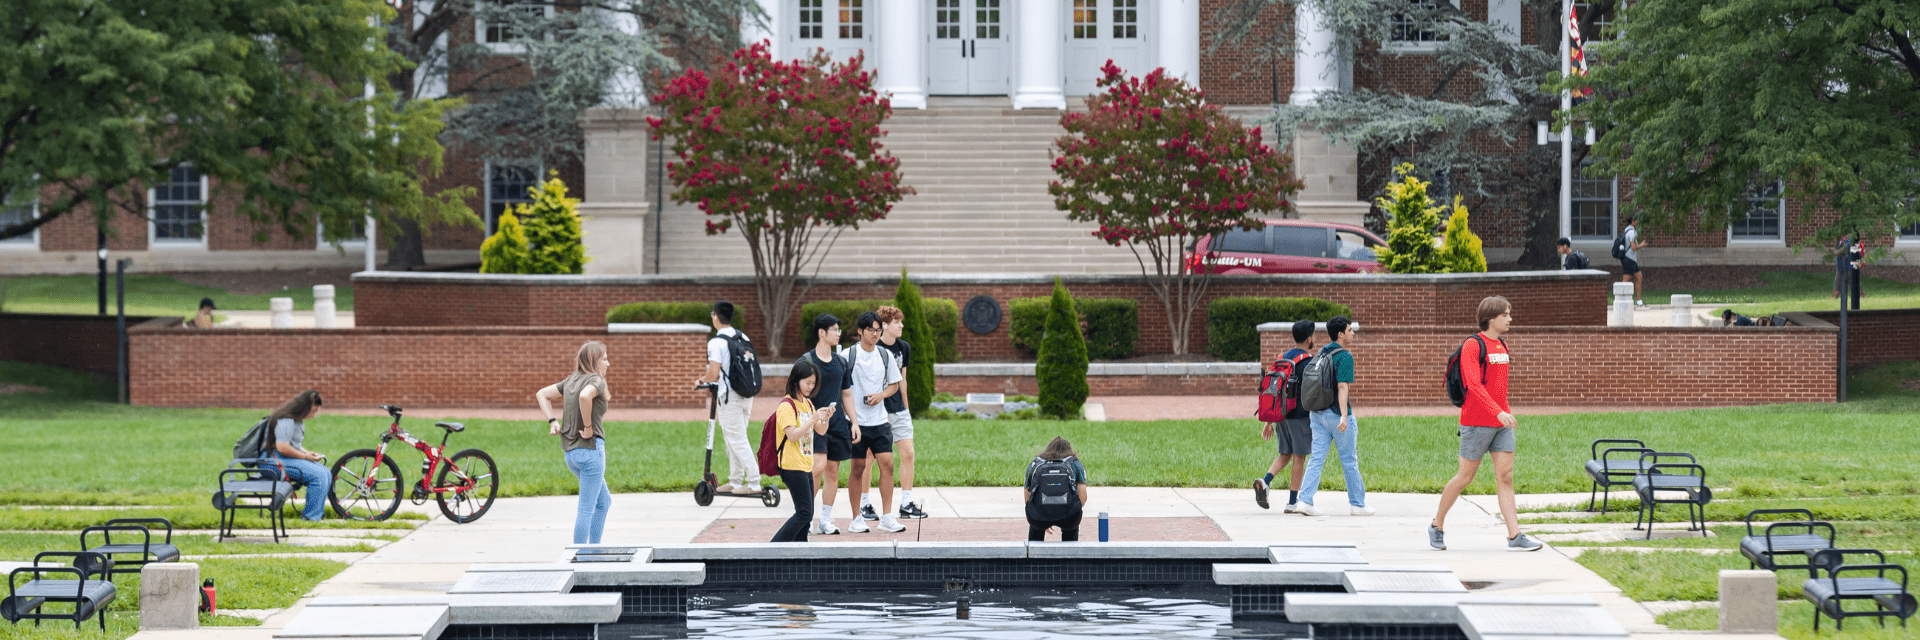 A photo of the UMD campus with students going about their day.